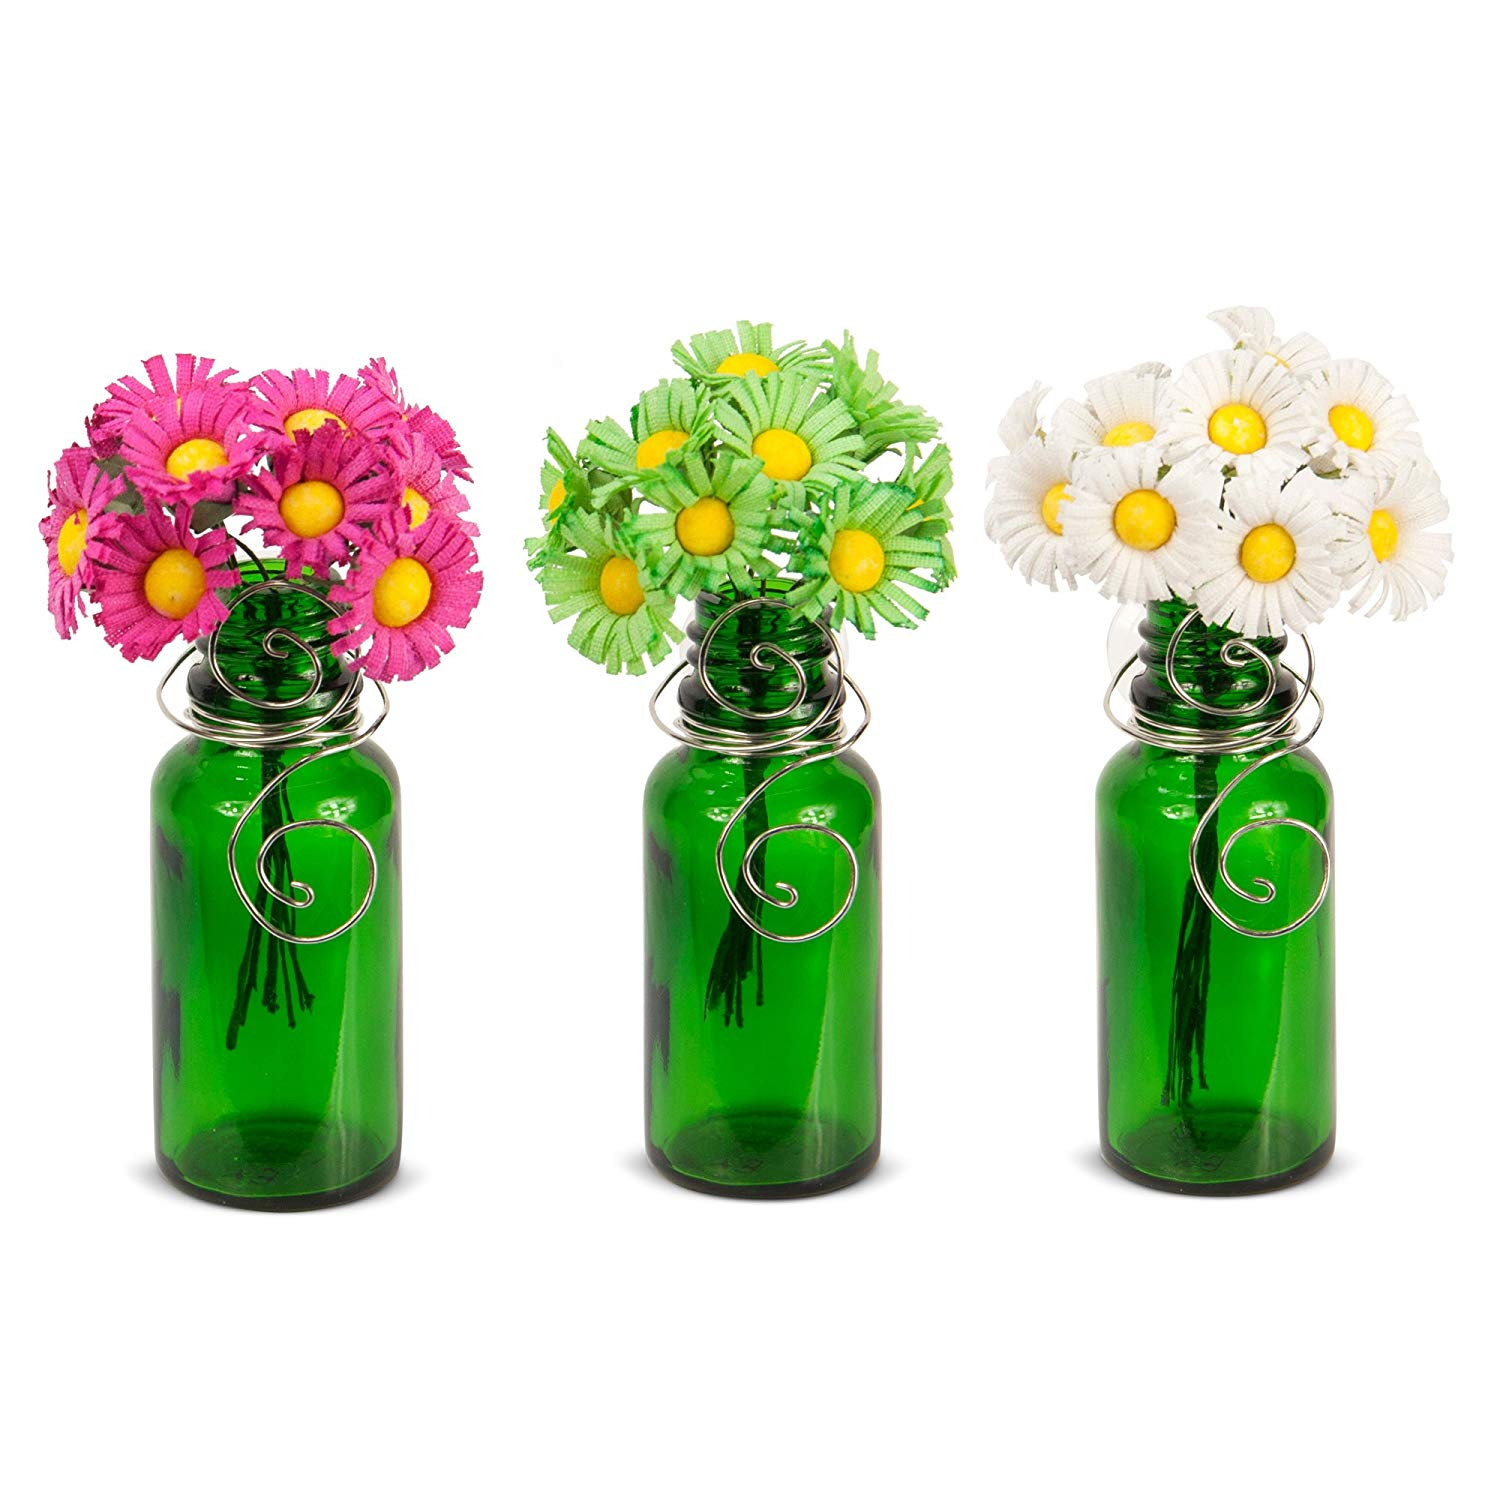 18 Lovable Small Heart Shaped Vase 2024 free download small heart shaped vase of amazon com vazzini mini vase bouquet suction cup bud bottle regarding amazon com vazzini mini vase bouquet suction cup bud bottle holder with flowers decorative fo